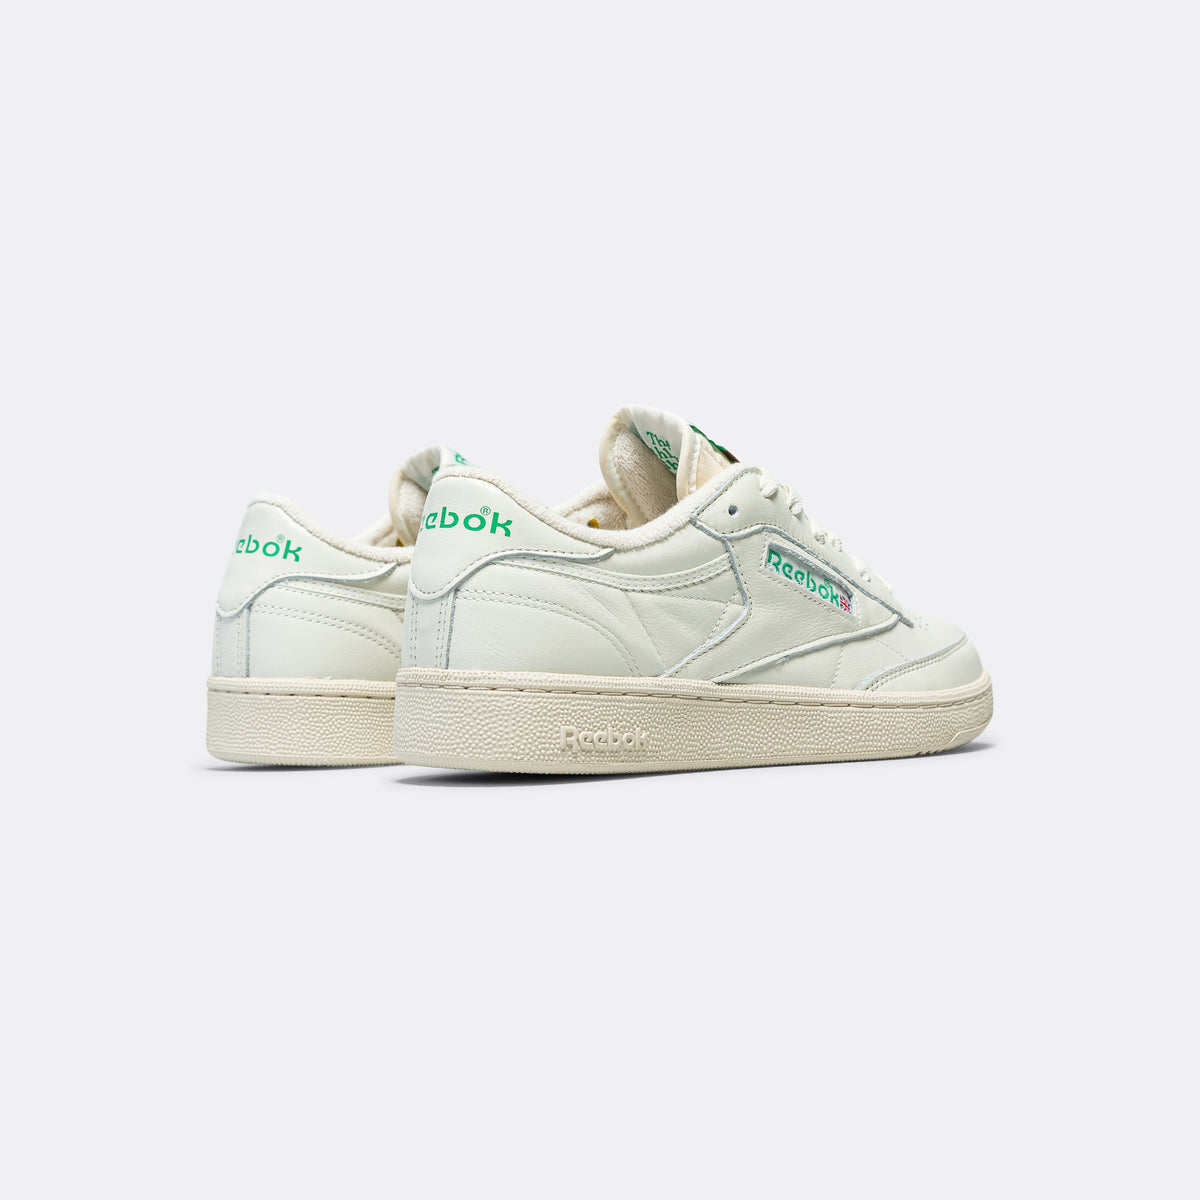 Reebok Club 1985 Chalk/Paperwhite/Glen Green | Up There | UP THERE